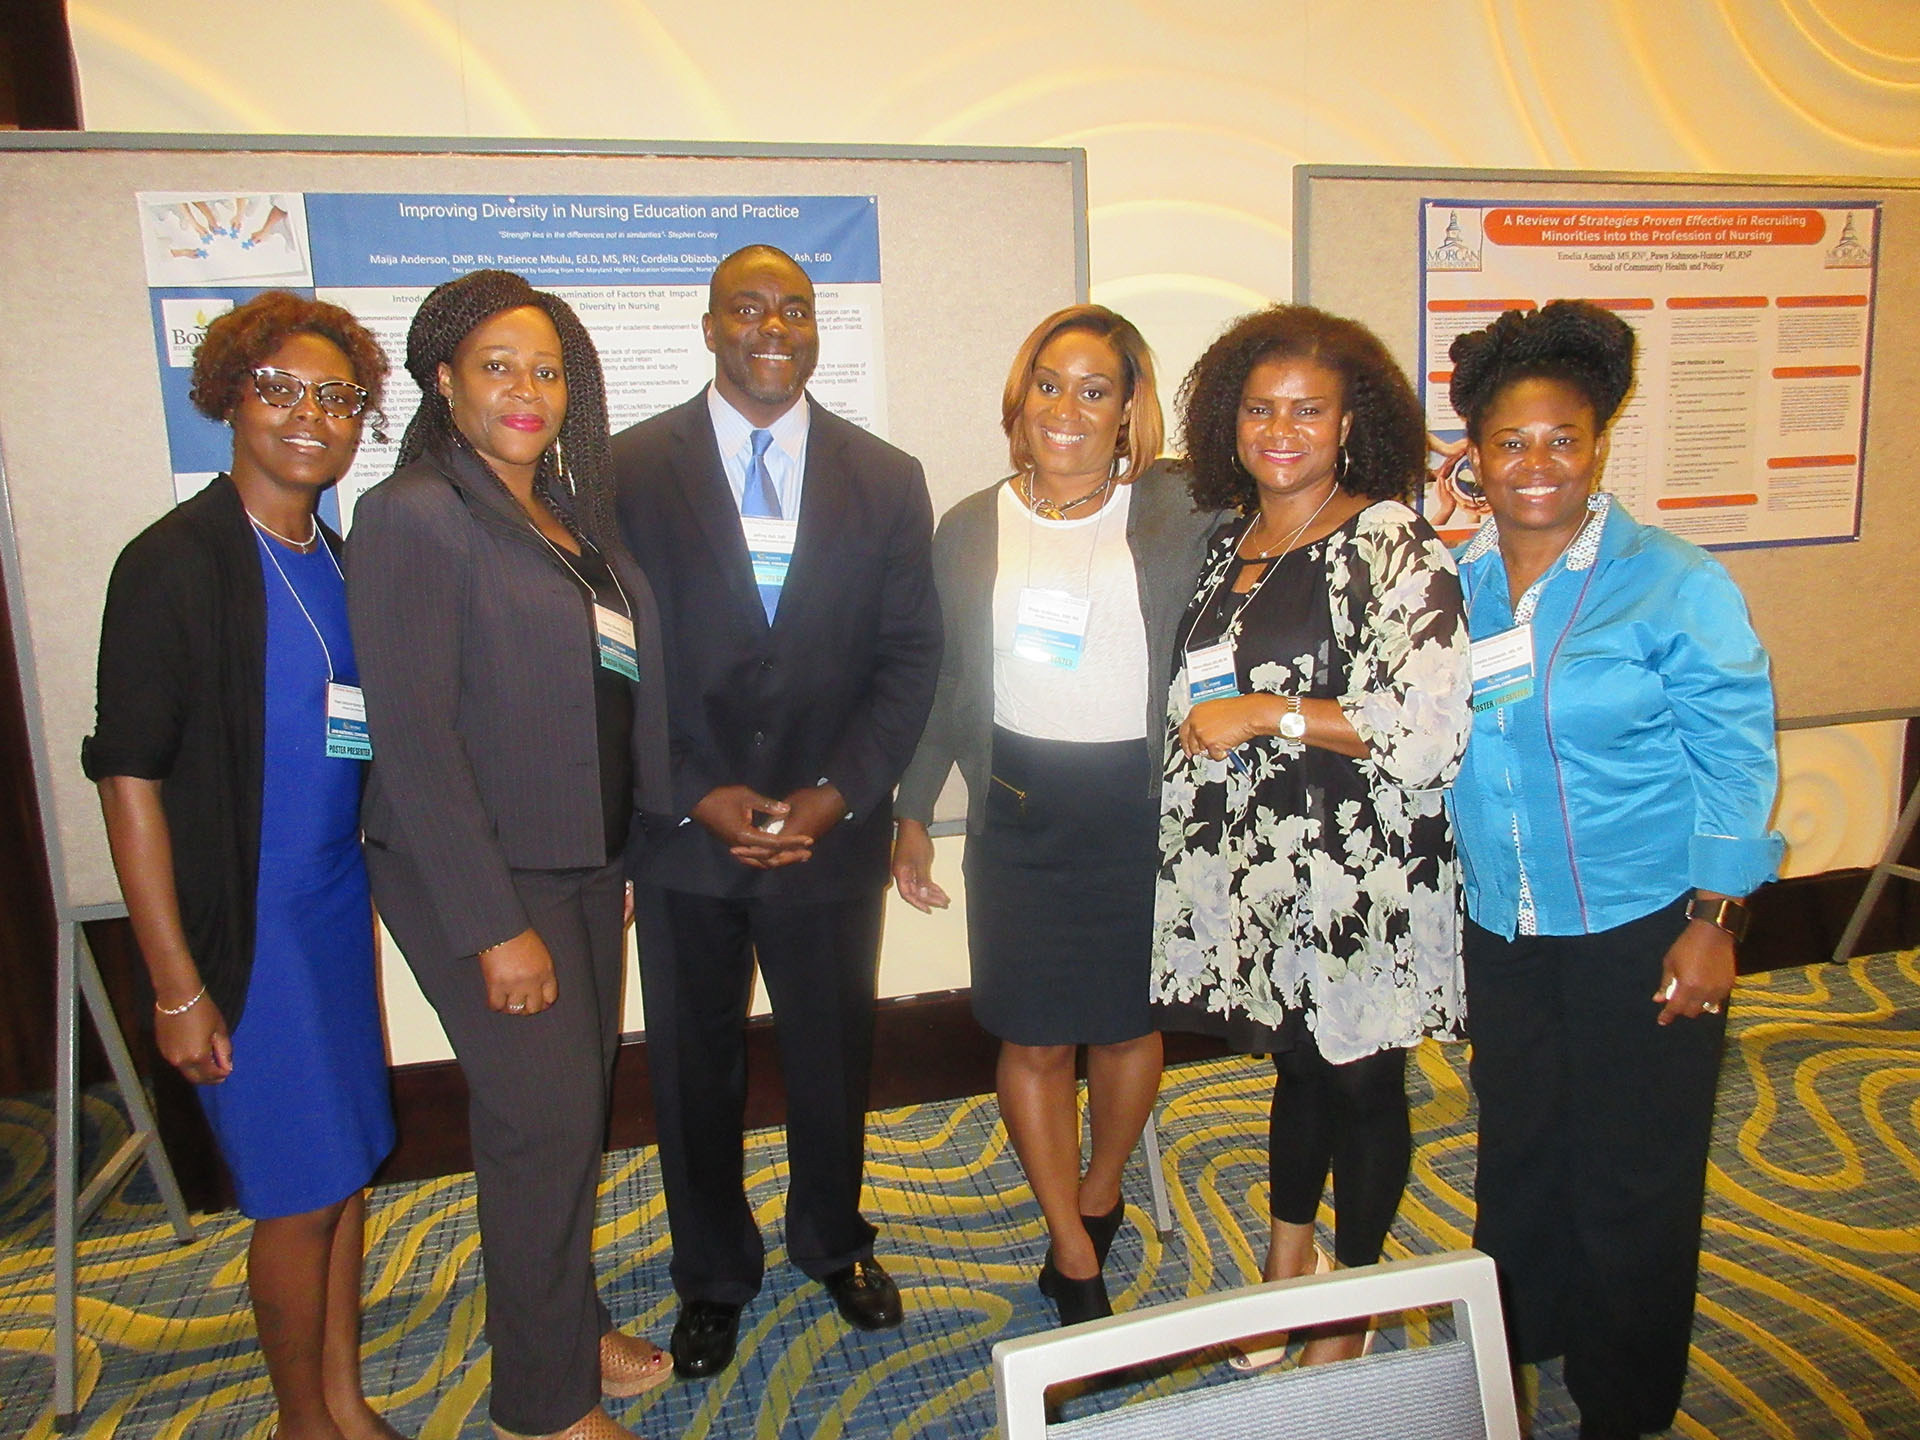 Poster Presentations at the National Association of Minority Medical Educators Annual Meeting